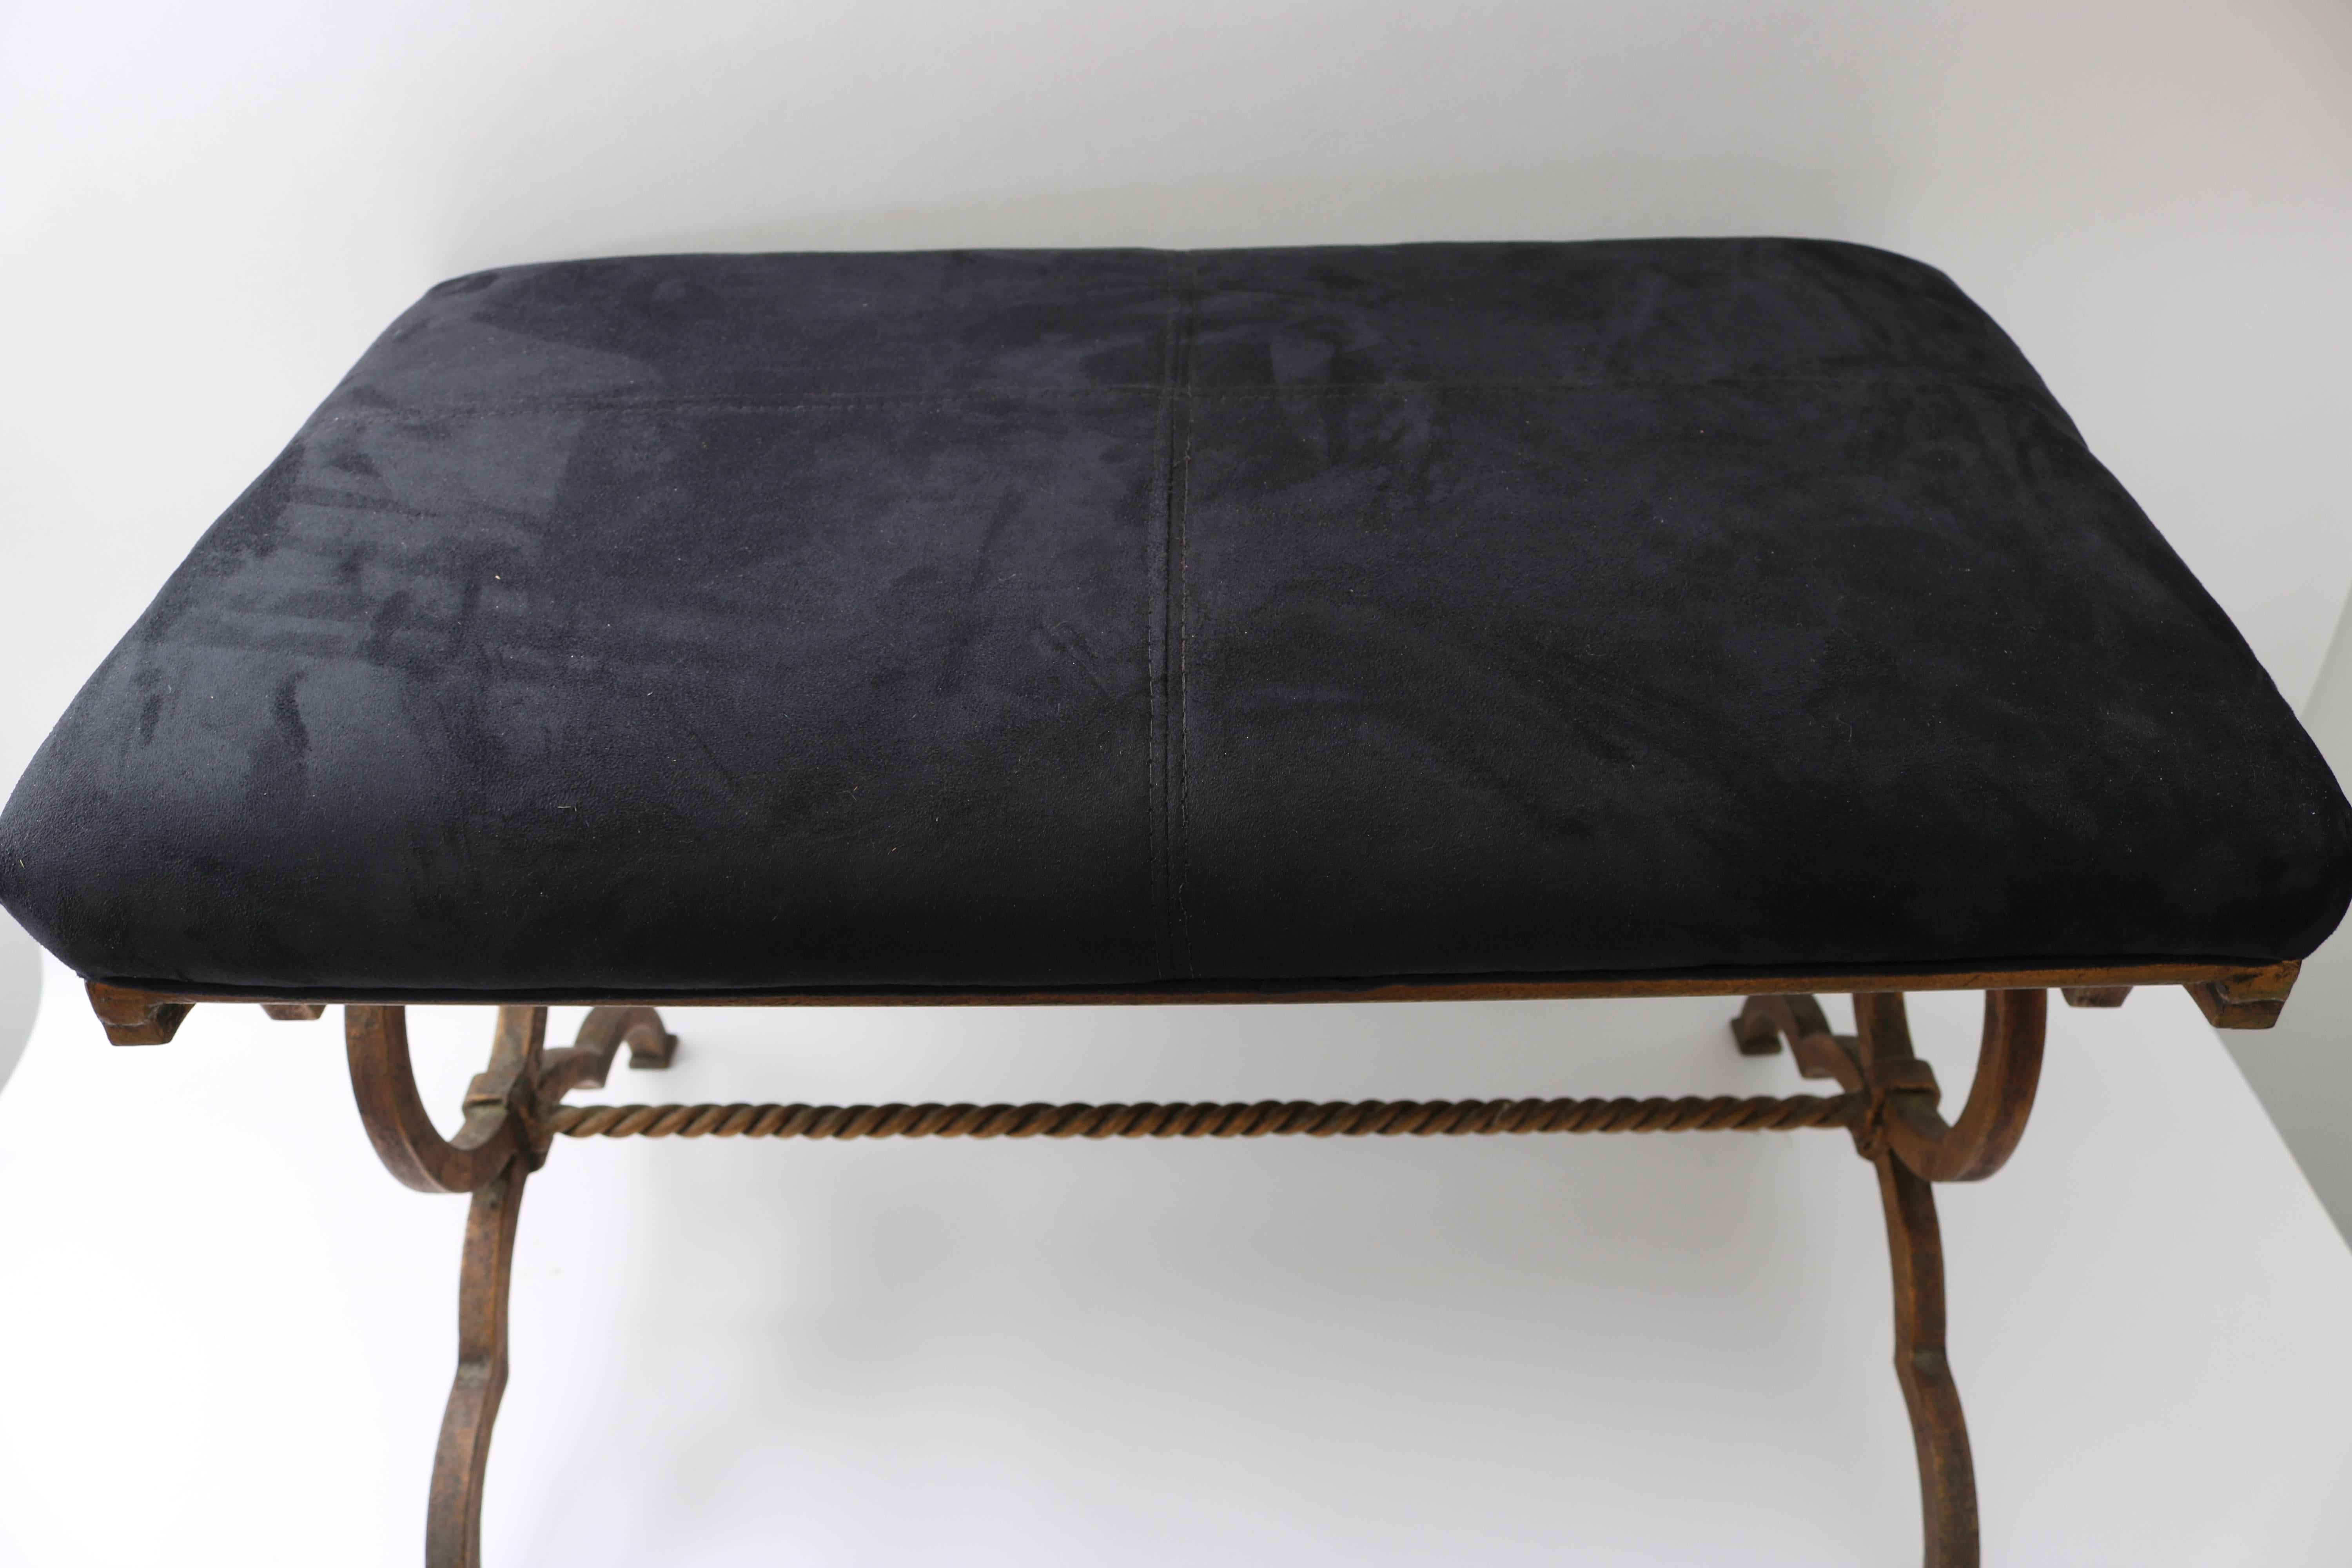 This stylish Gilbert Poillerat gilt bronze bench was recently purchased from a Palm Beach estate and will make the perfect piece for your entry hall, vestibule or perhaps dressing table. The black suede contrast handsomely with the gilt